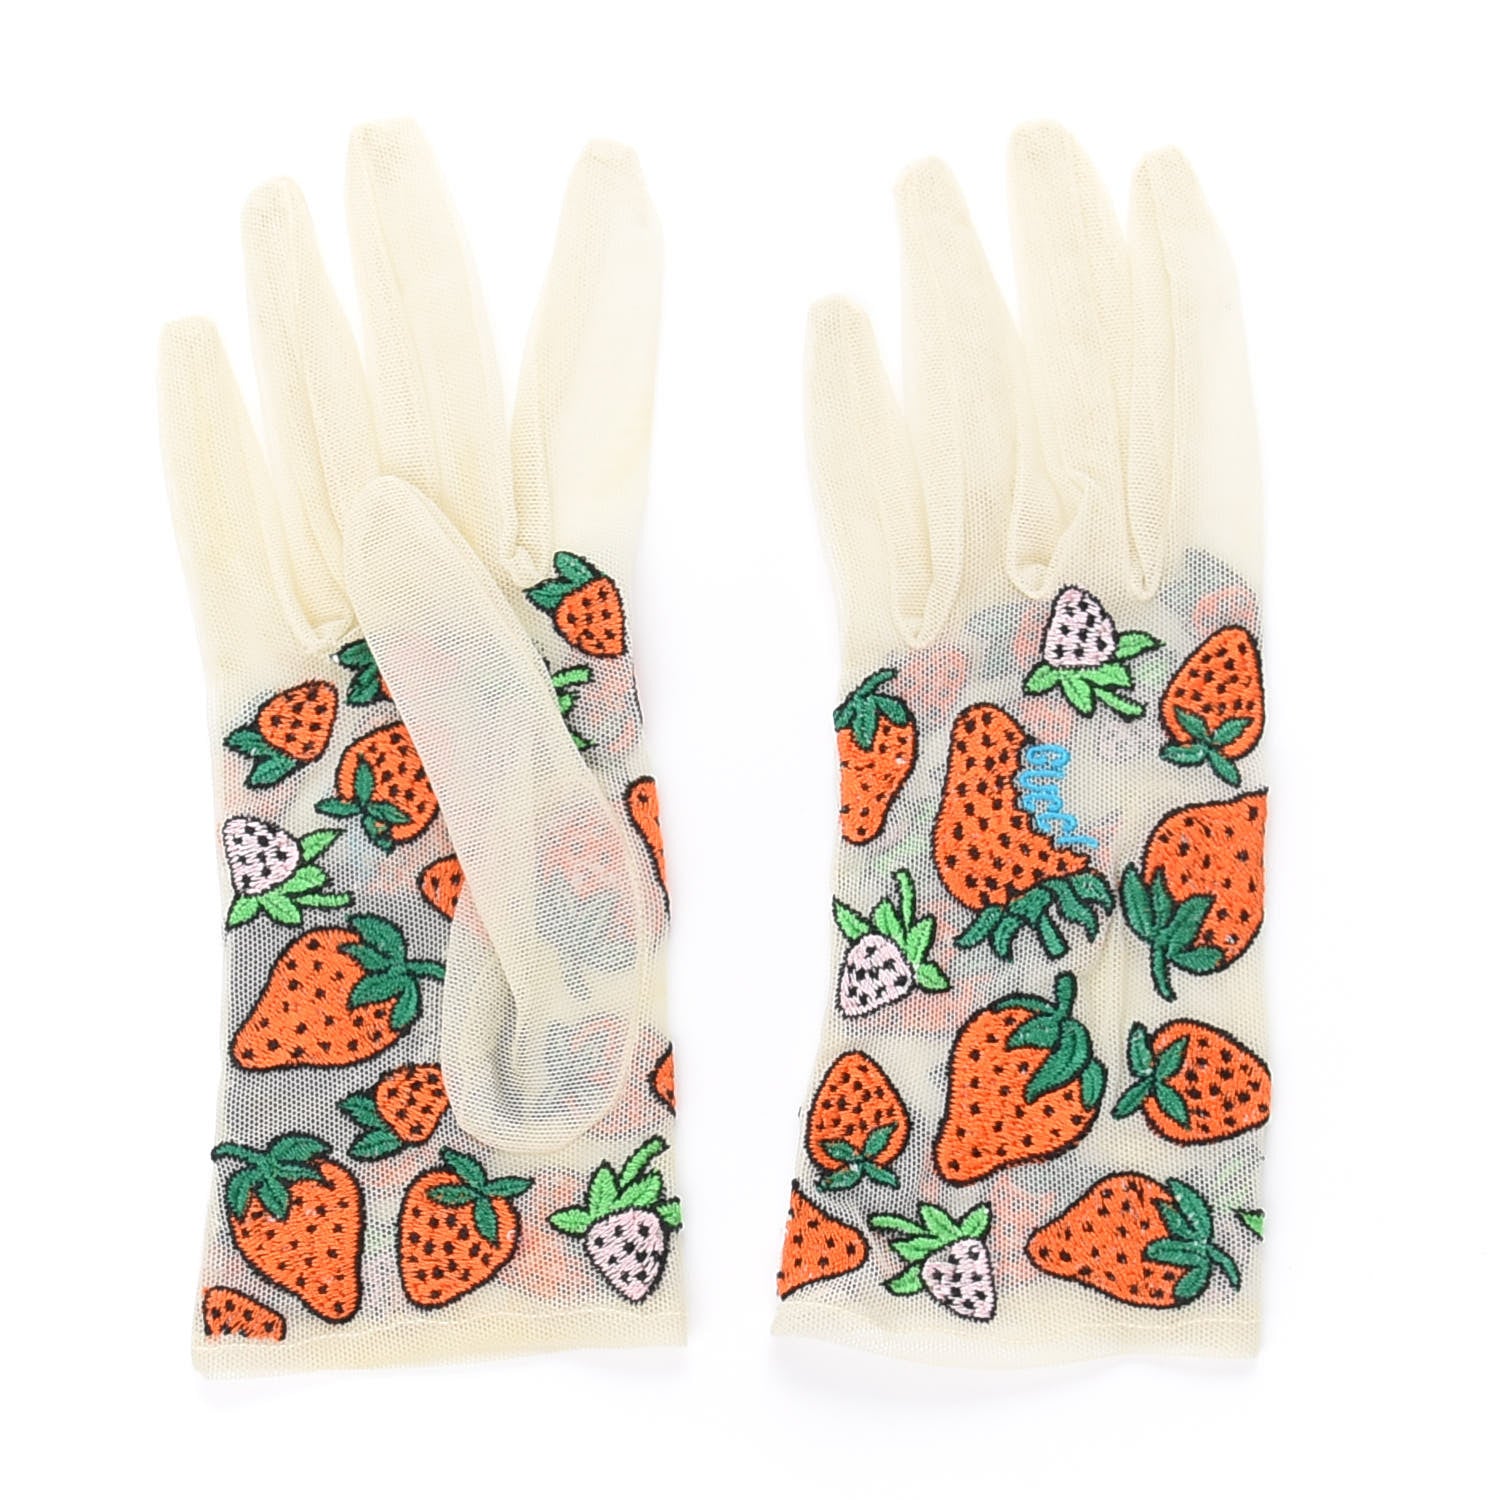 Gucci, Embroidered tulle gloves, NET-A-PORTER.COM